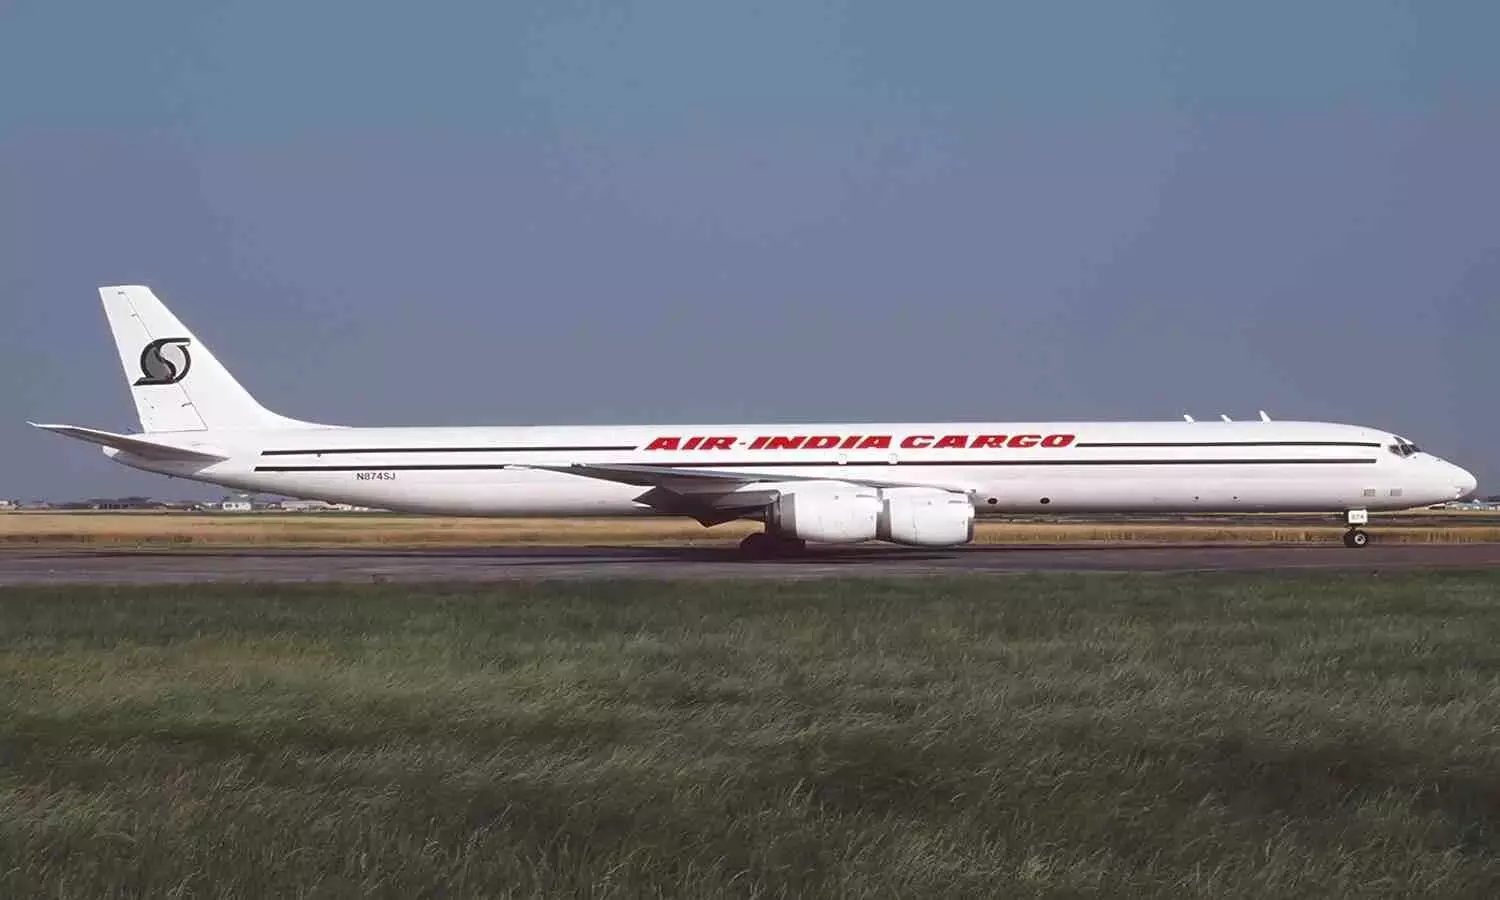 Air-India Cargo DC-8 freighter in Belgium, July 1994 (Source: Airliners.net)